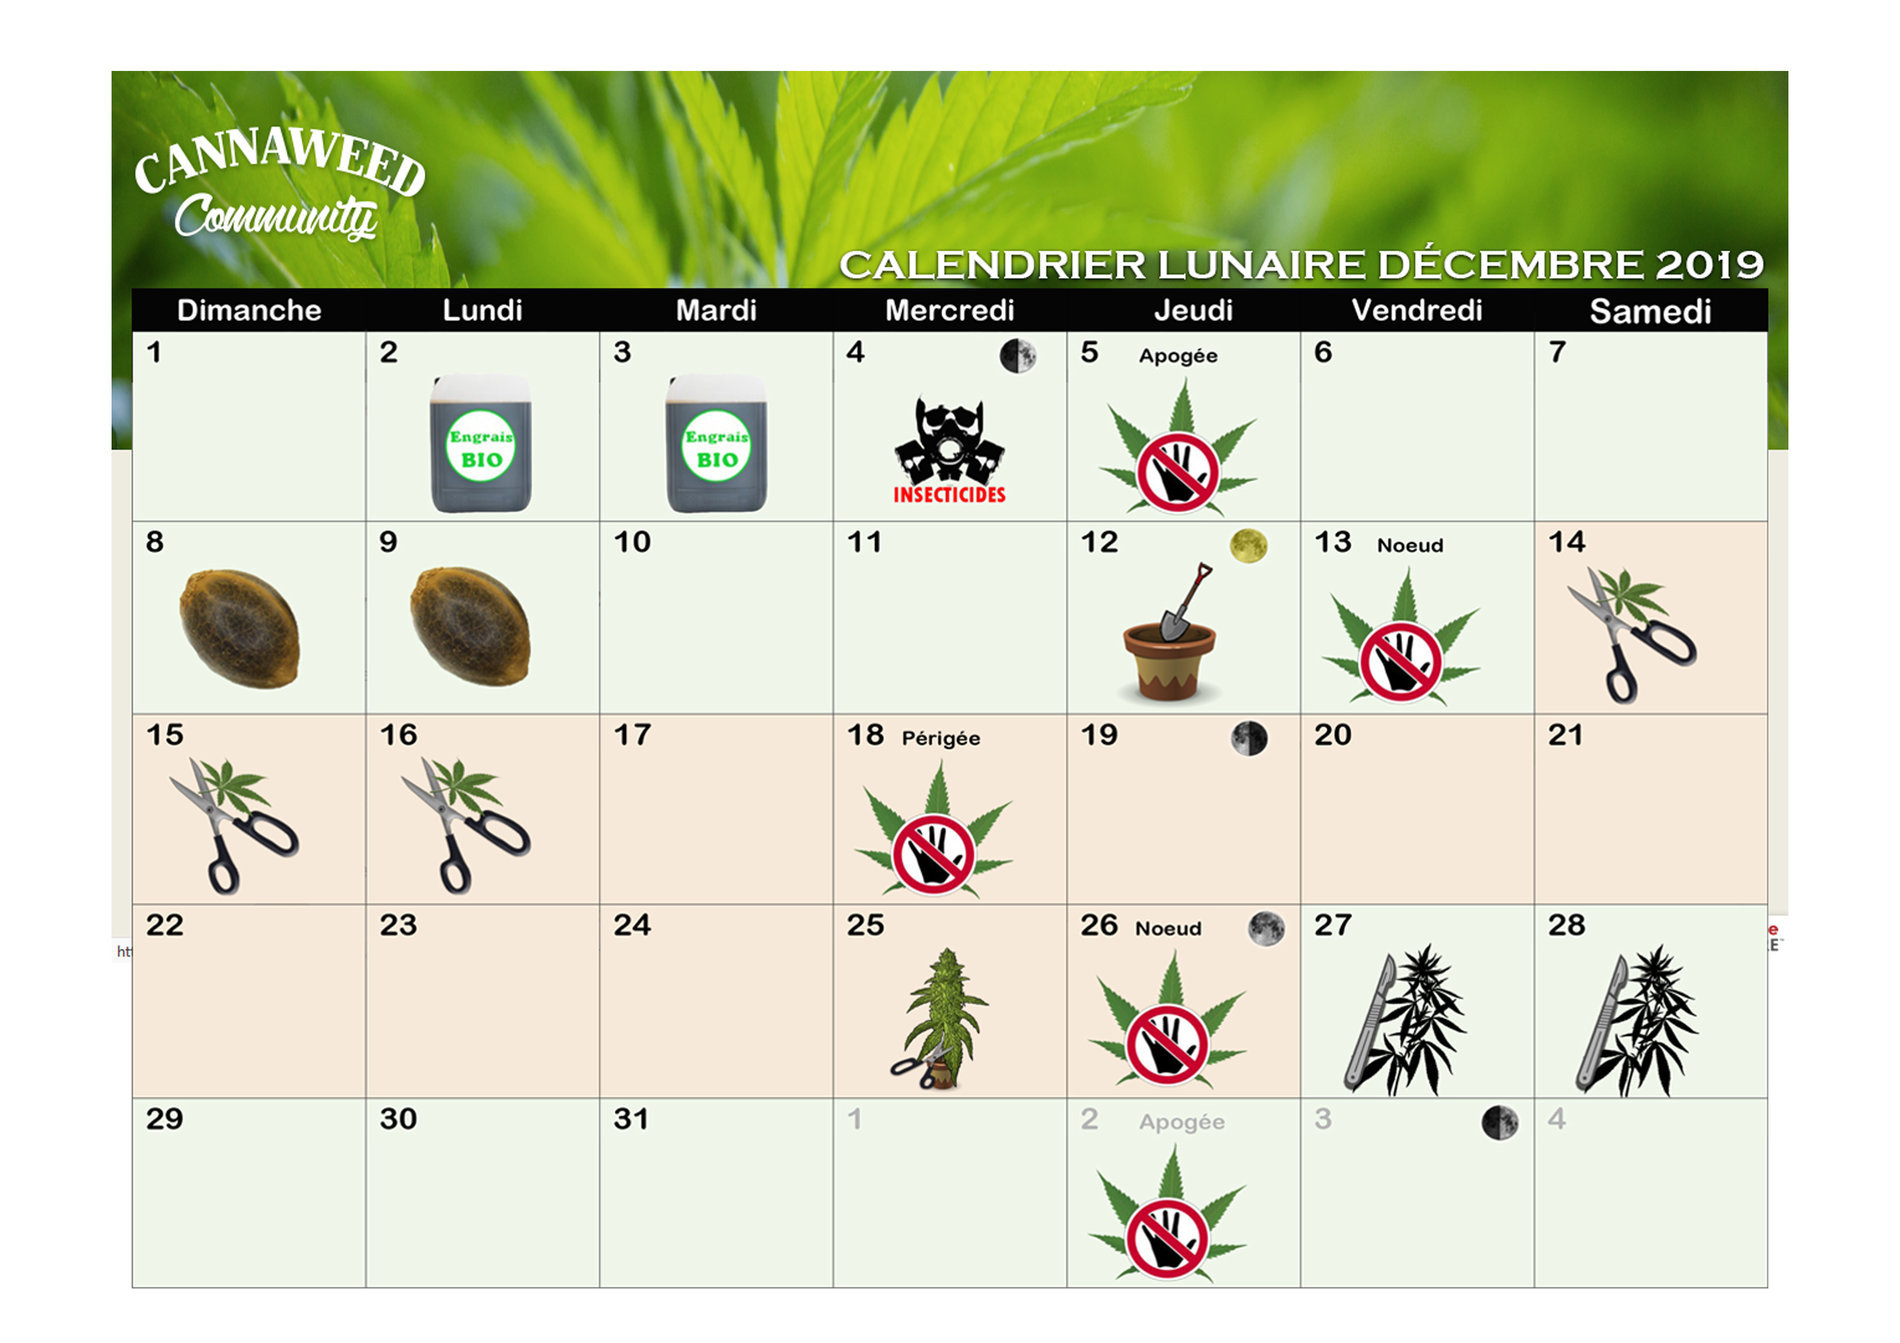 Calendrier Lunaire - Proposez vos guides / tutos - CannaWeed